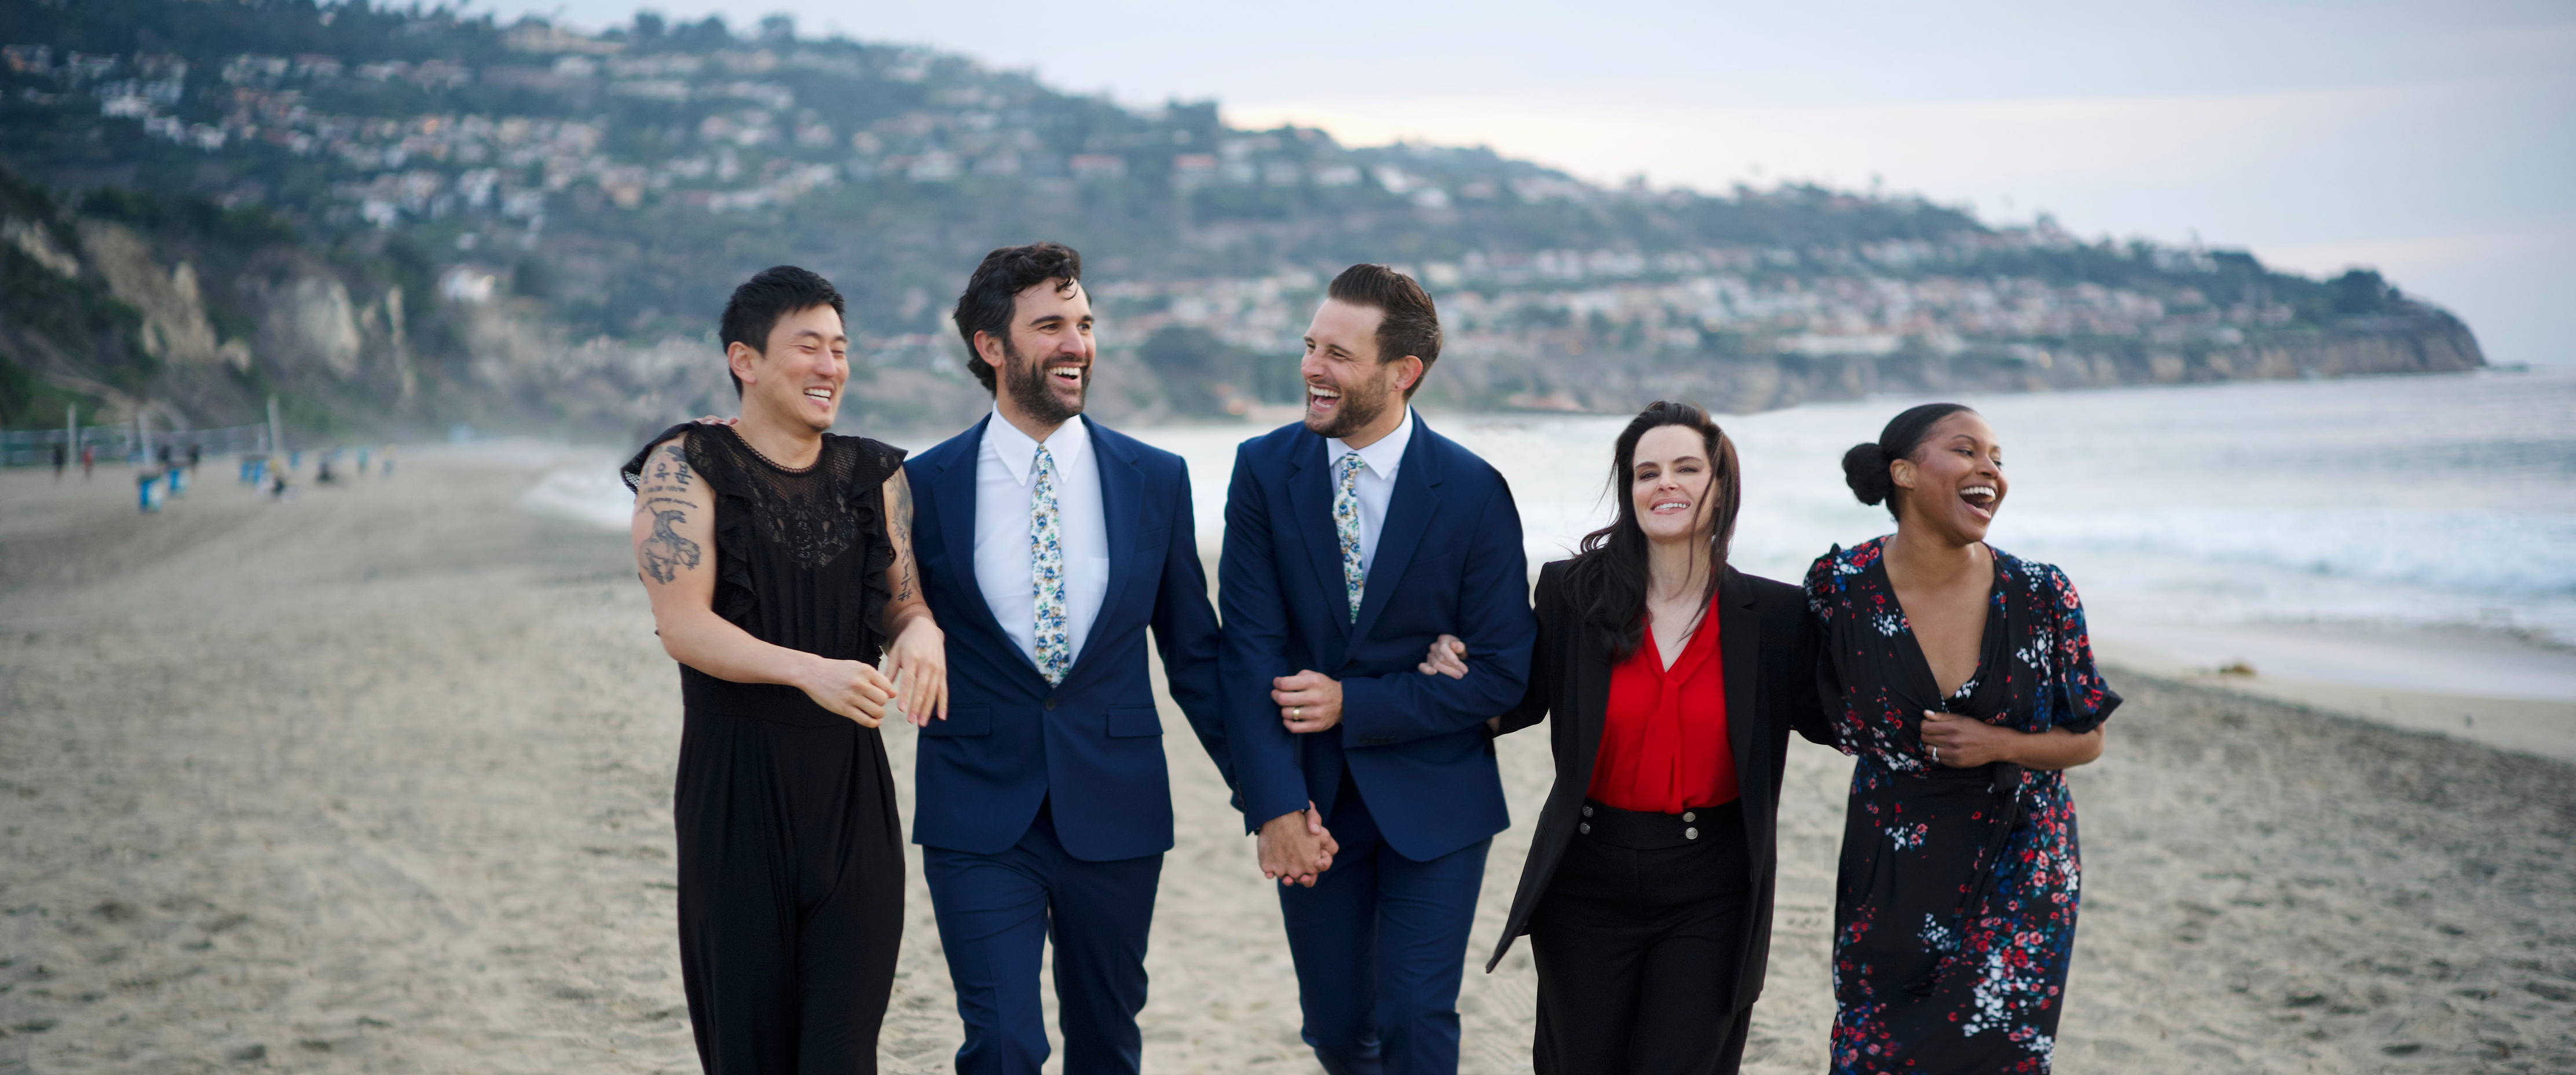 Five people walk arm-in-arm along a beach, smiling and laughing.